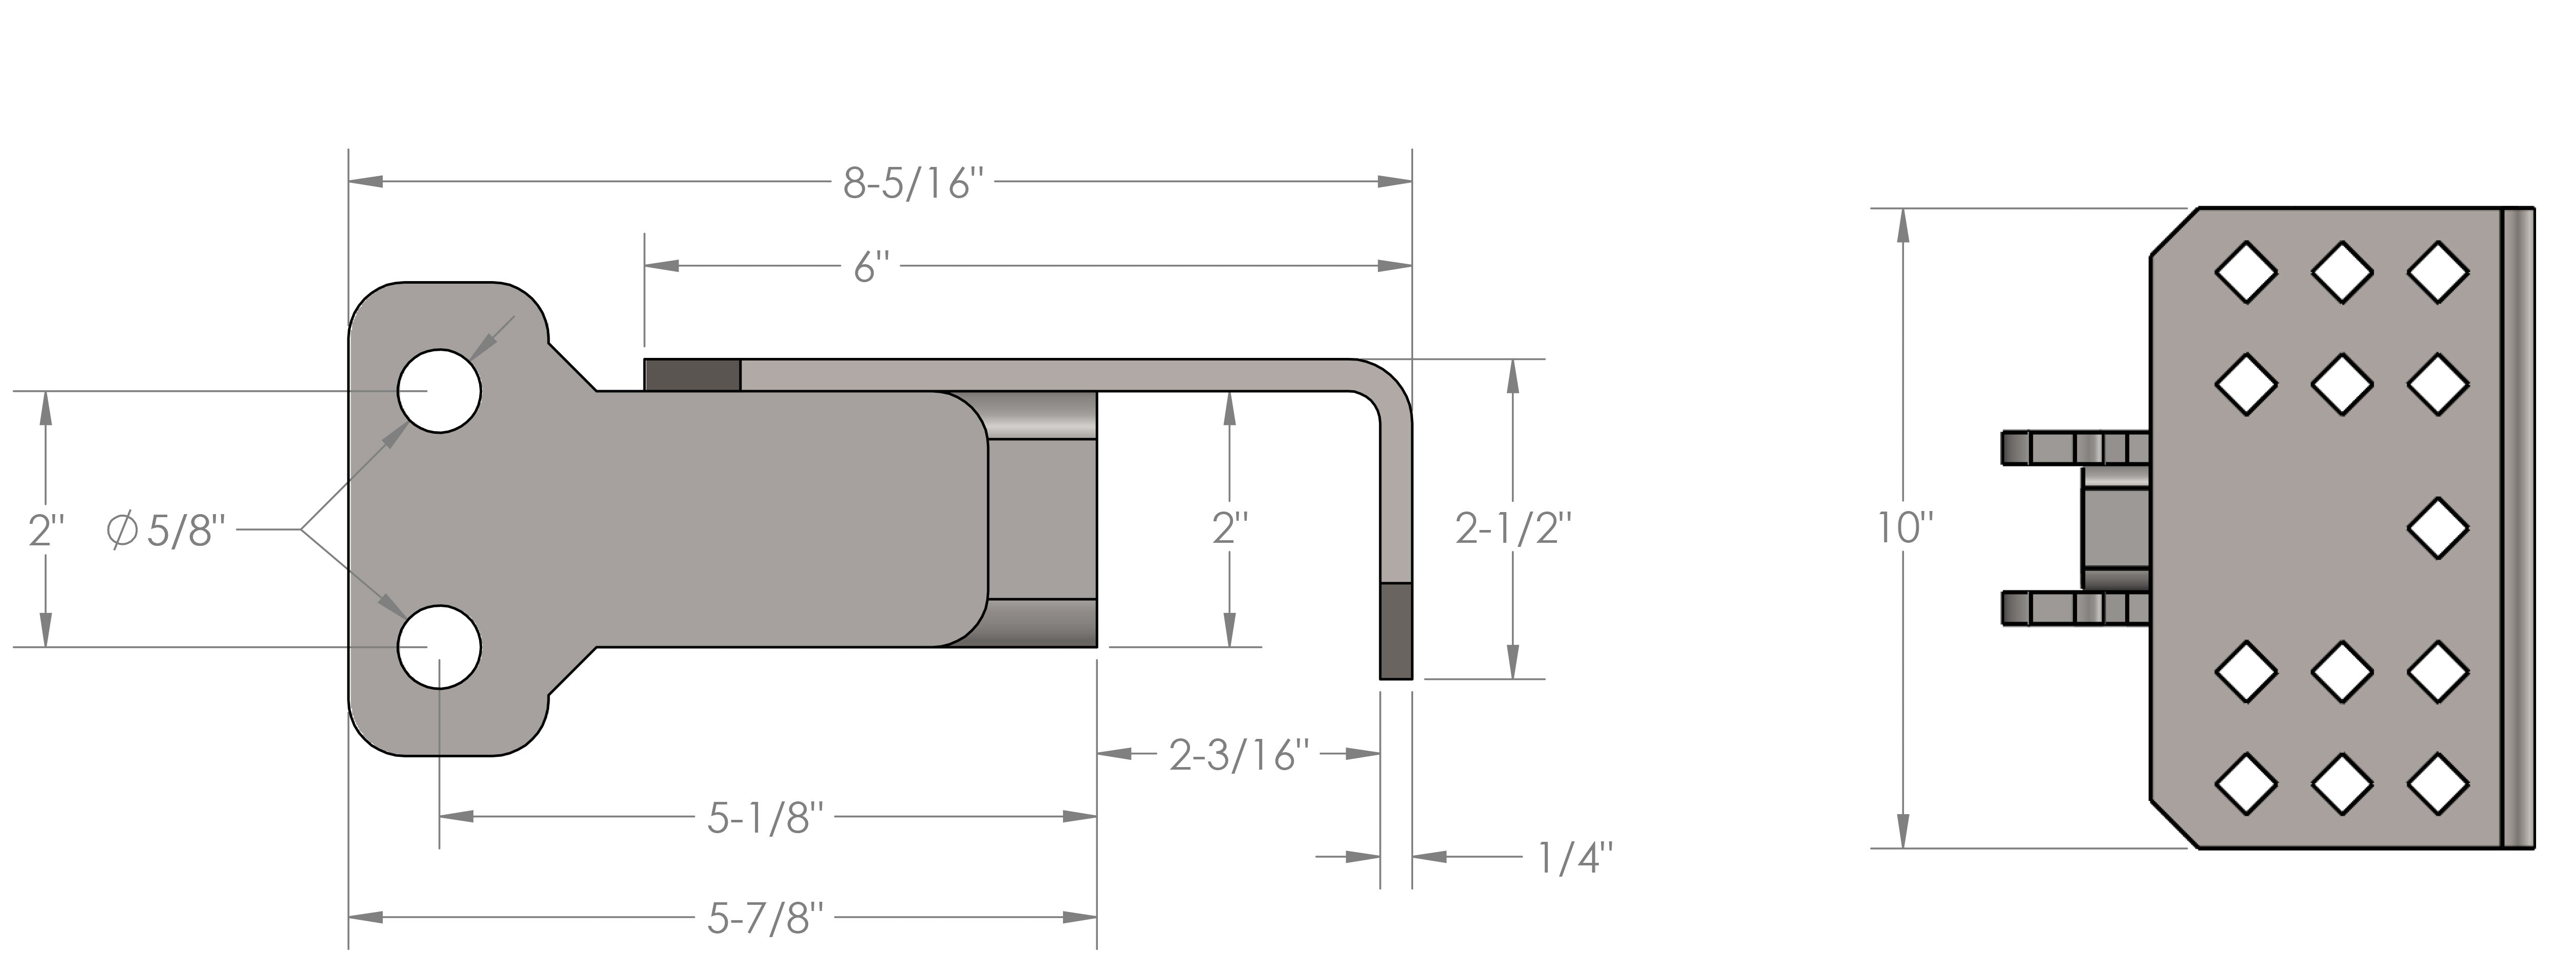 BulletProof Hitch Step Attachment Design Specification